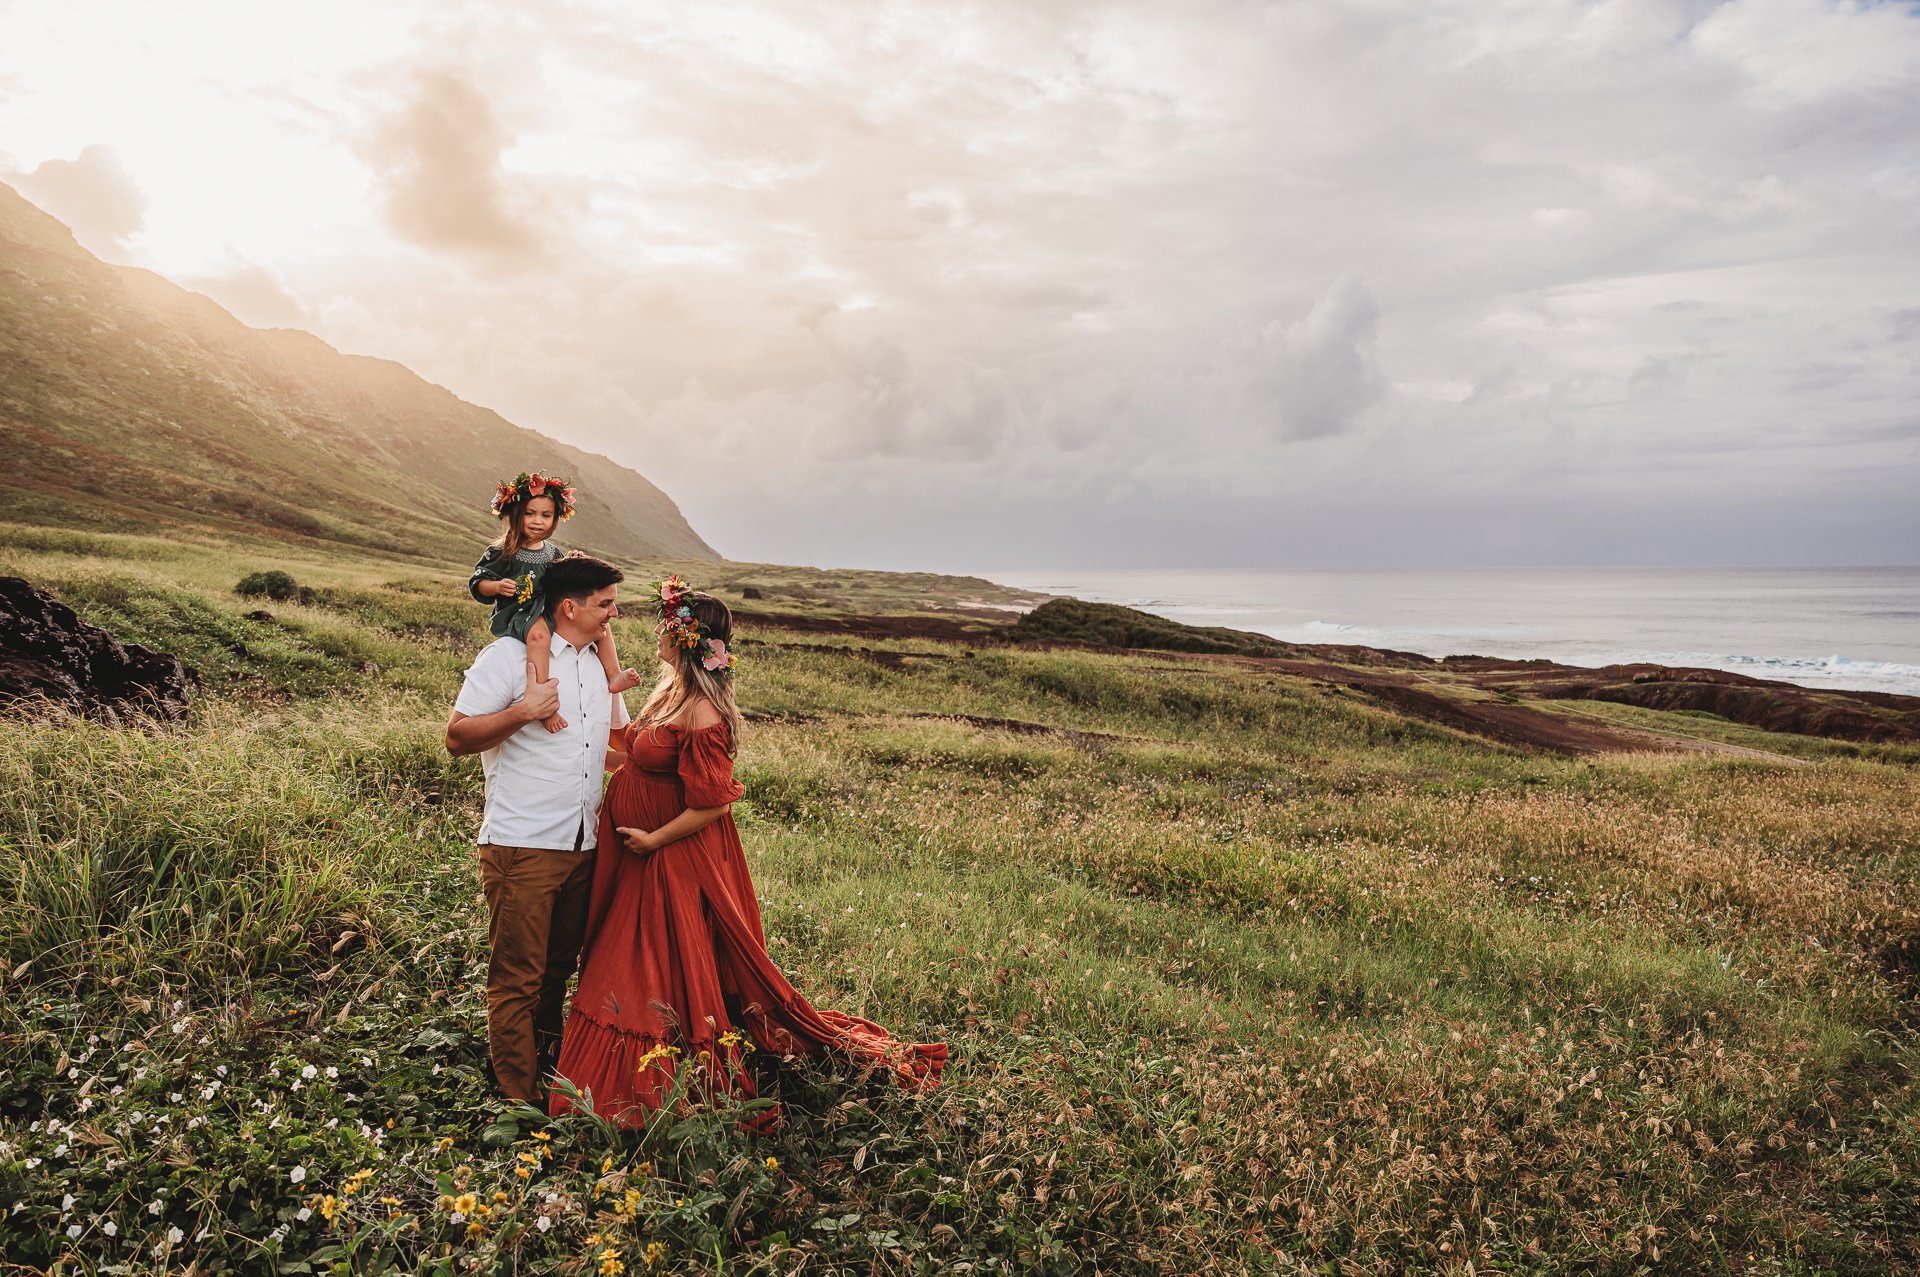 Kaena-Point-North-Shore-Oahu-Hawaii-Maternity-Session-Flower-Crown-Gown-Sarah-Elizabeth-Photos-and-film-maternity-2.jpg